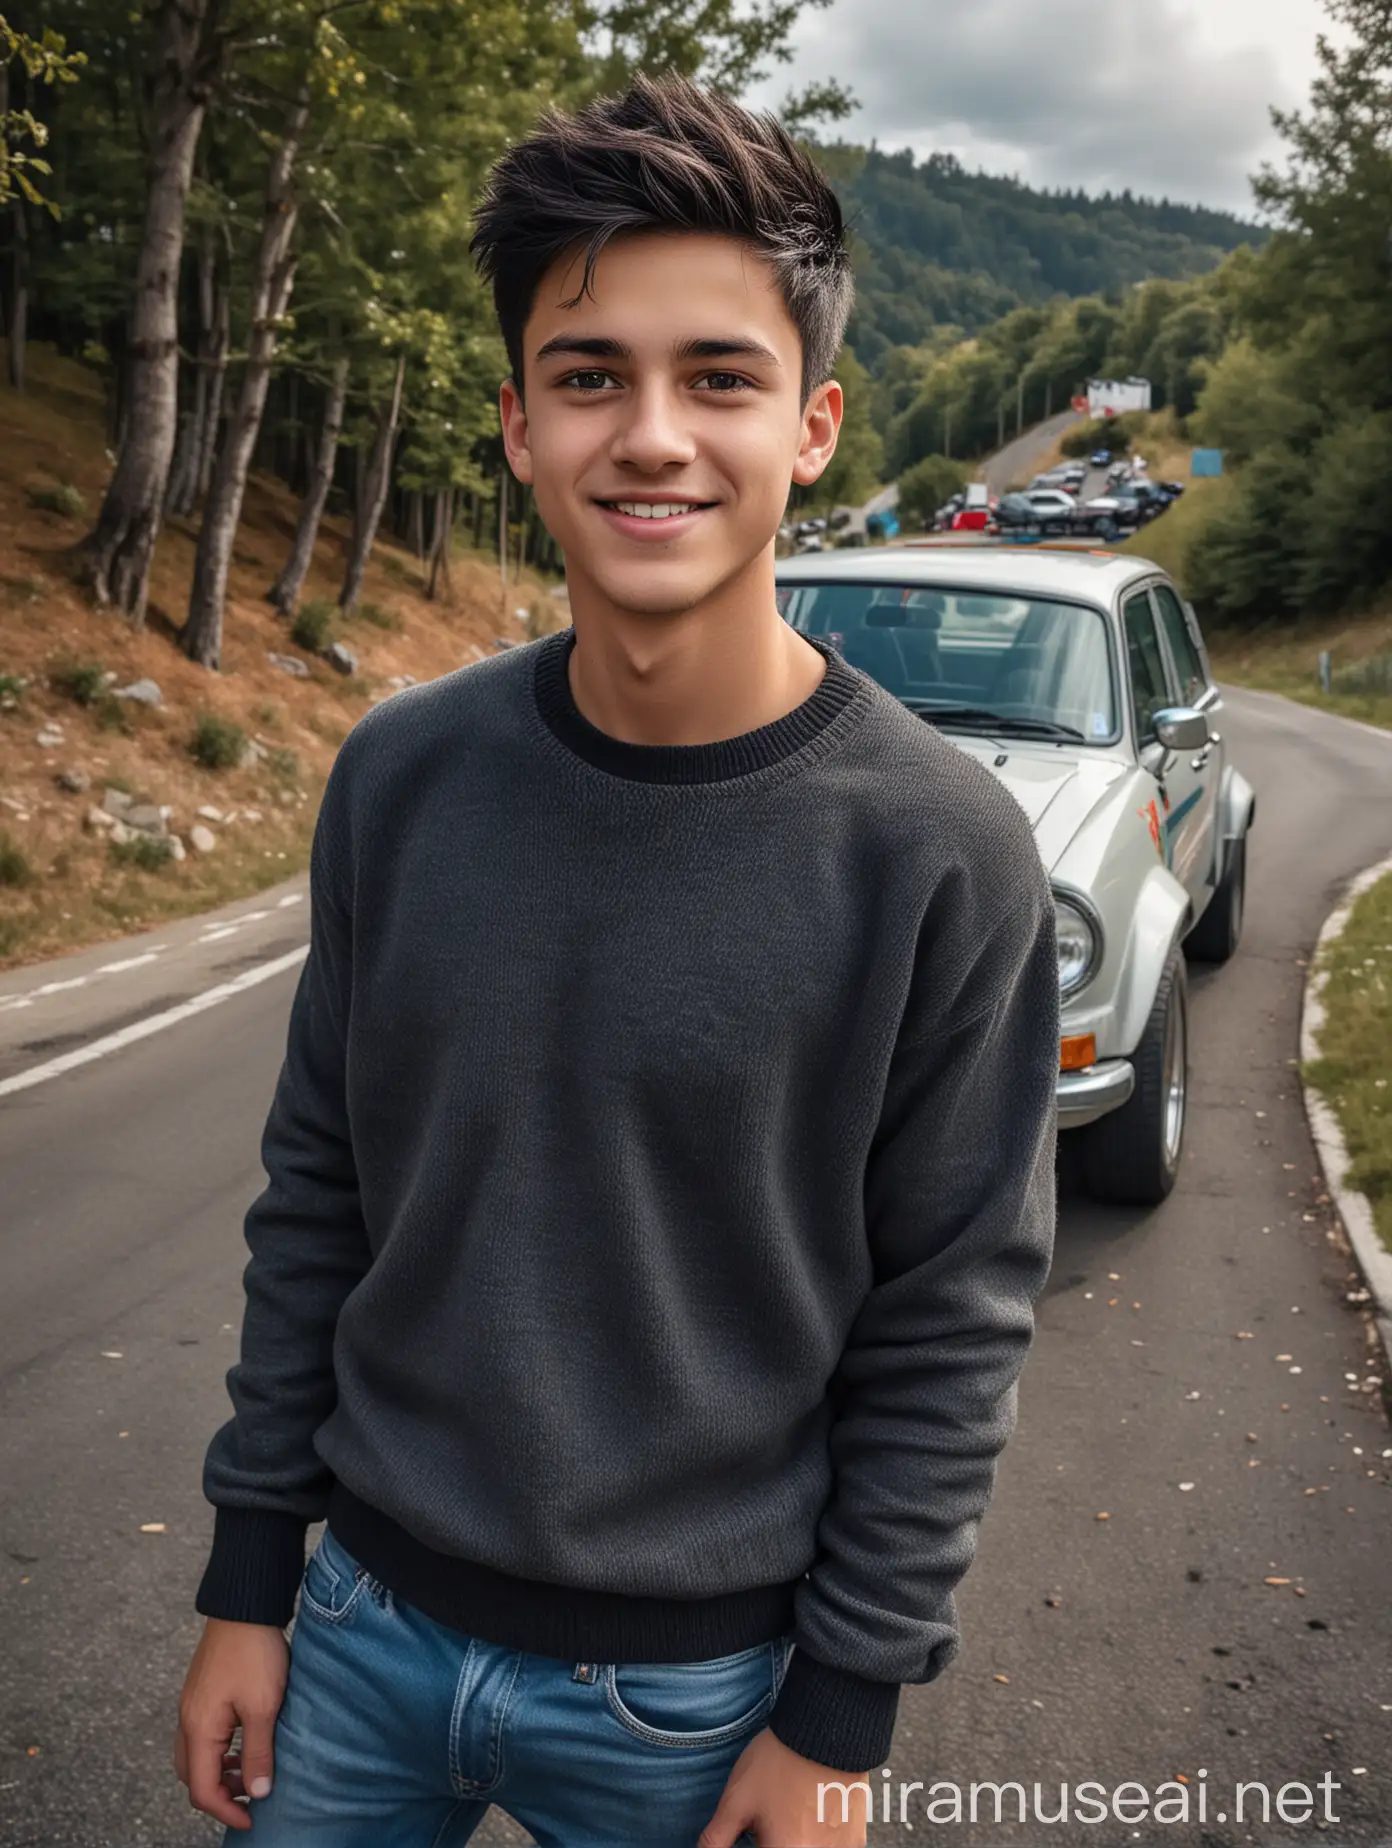 32k HDR Photorealistic full color, a very handsome man, 18 year old, oval face, spiky short black hair, wearing a sweater, jeans, standing next to a rally car, smiling face looking forward, car parked on a hill, with a winding road at the bottom, trees in the background, Canon eos r3, canon  fish eye lans,